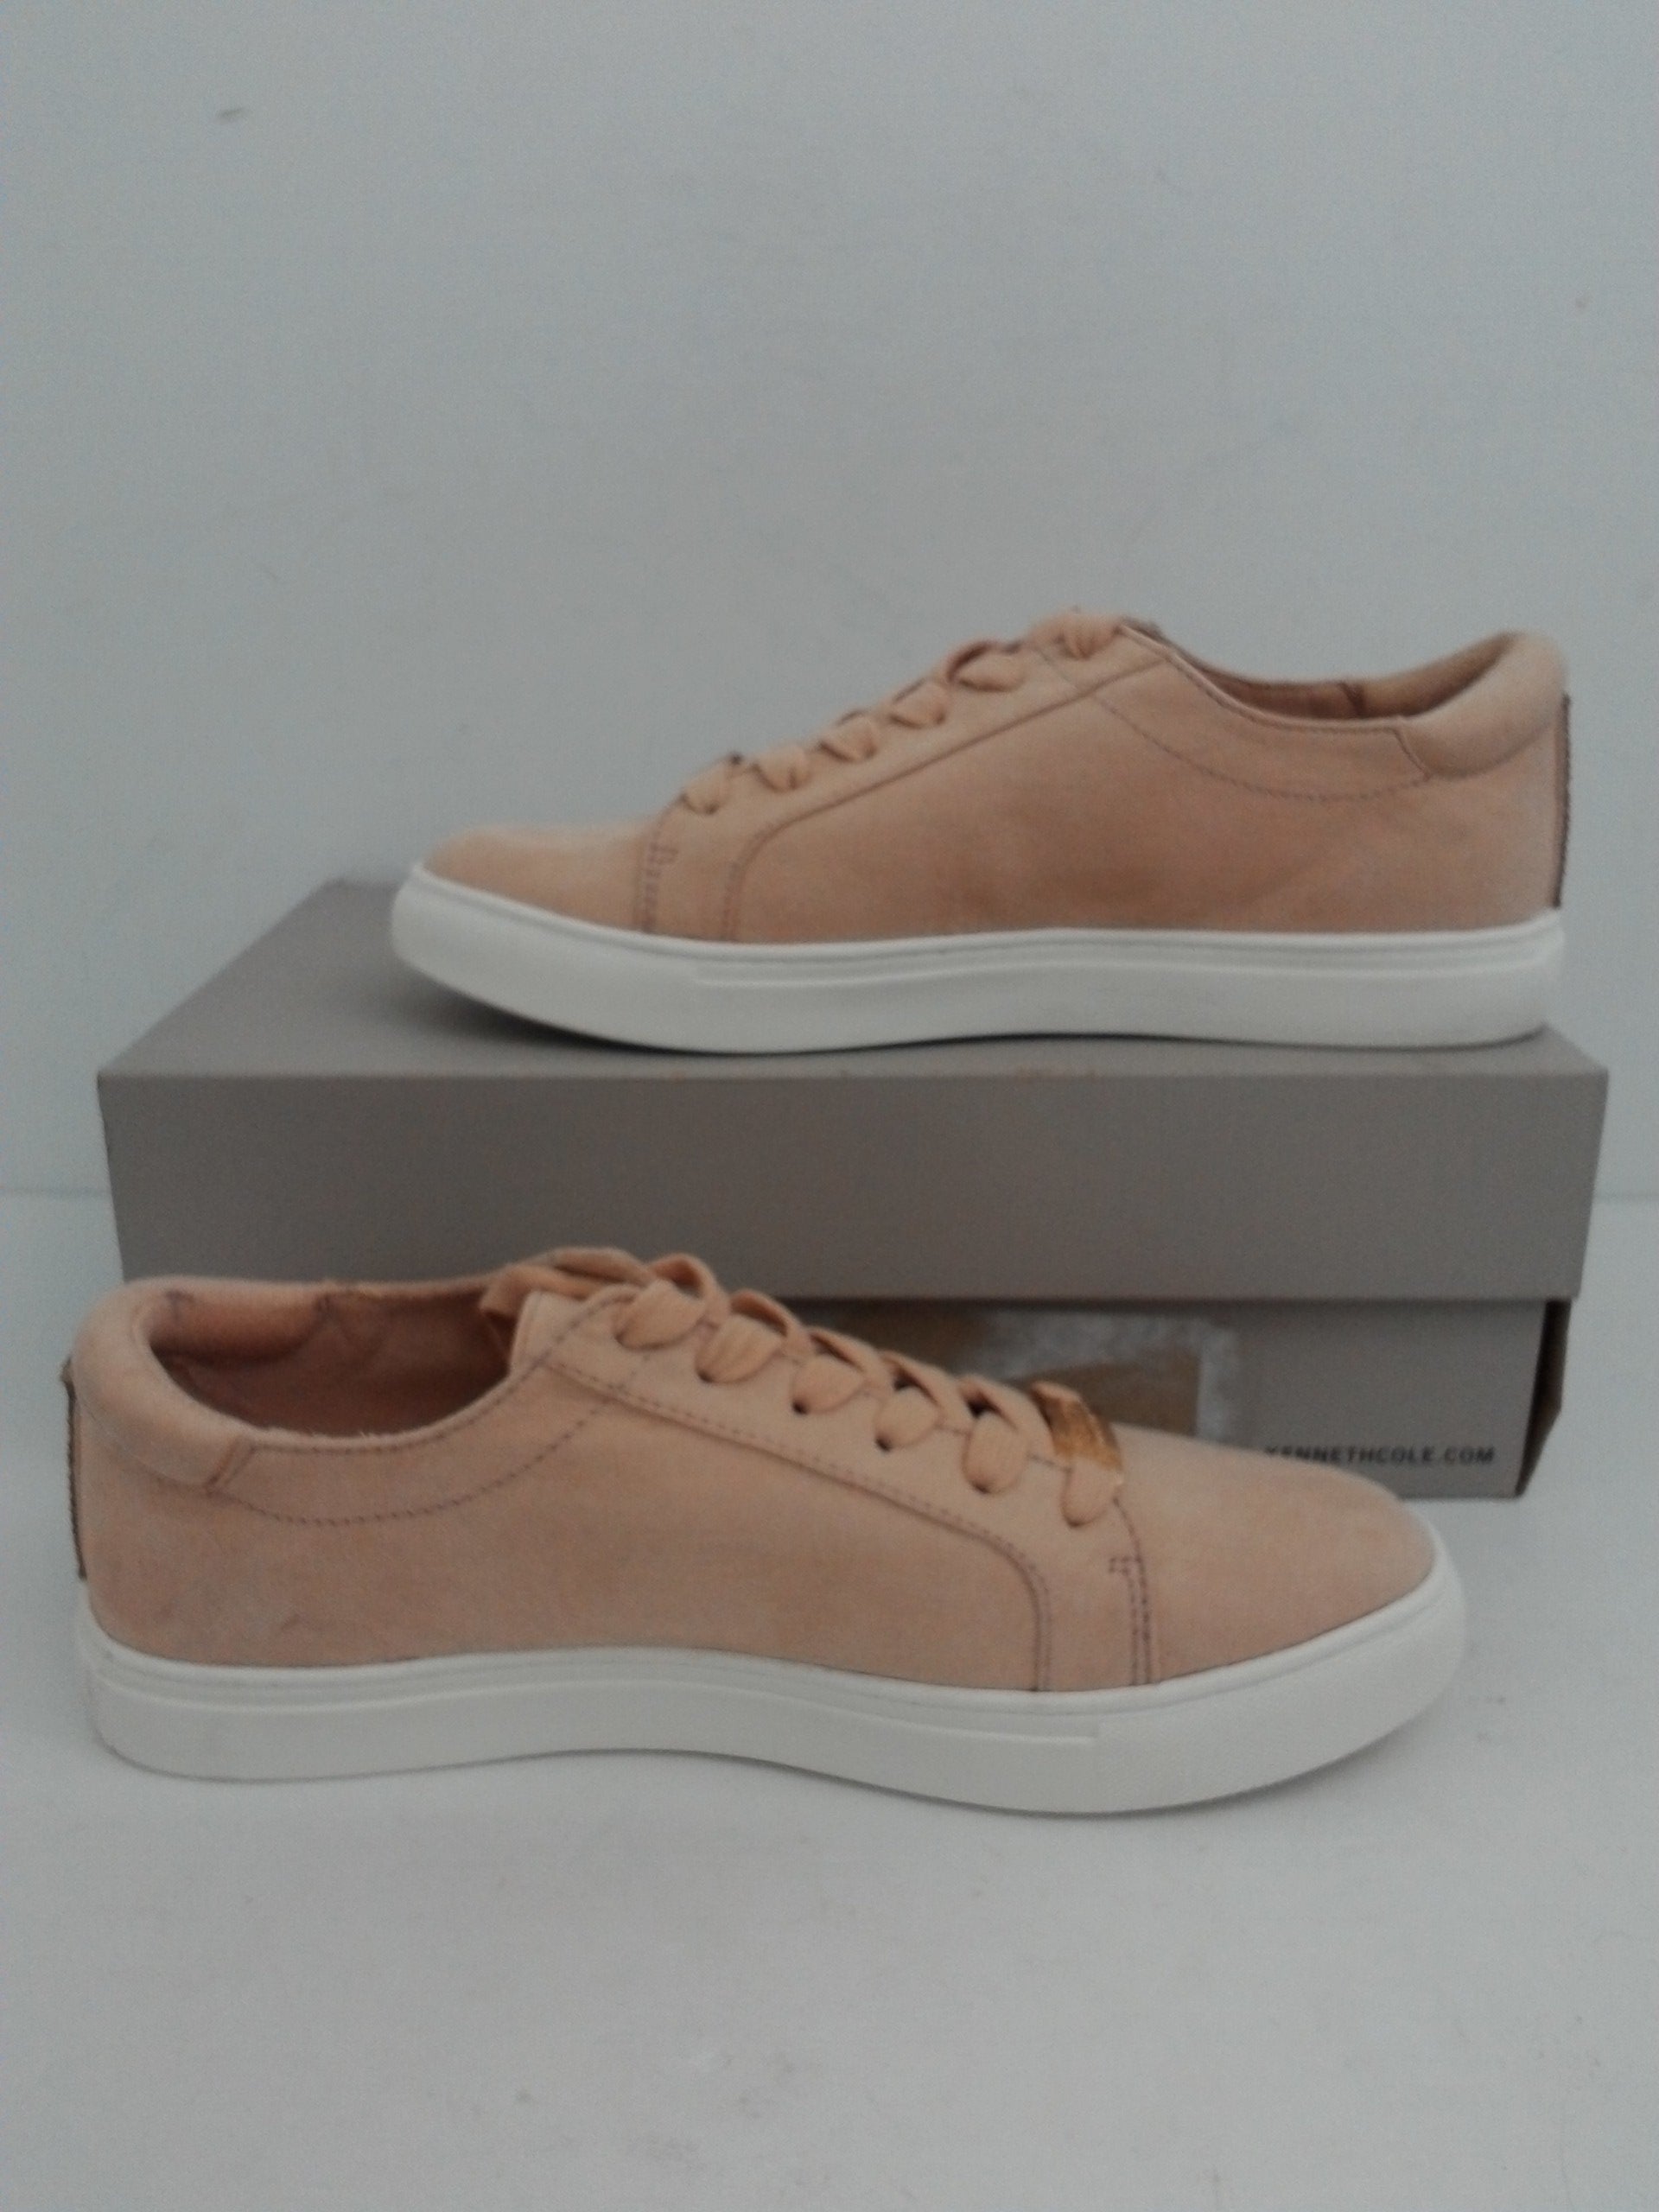 Kenneth Cole Reaction Women's Joey Blush Suede Sneaker Size 7 M - Prime ...